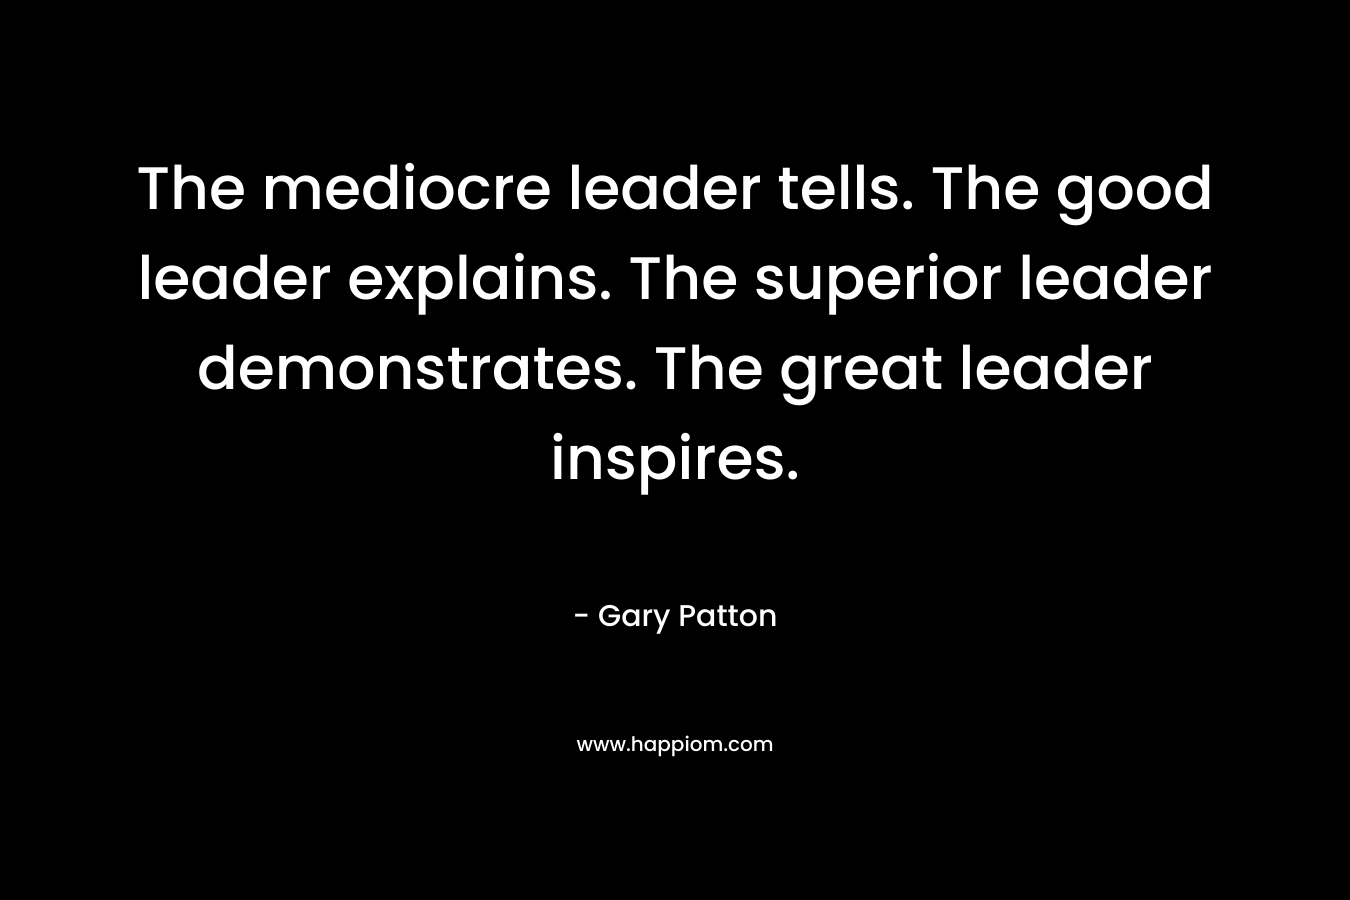 The mediocre leader tells. The good leader explains. The superior leader demonstrates. The great leader inspires. – Gary Patton